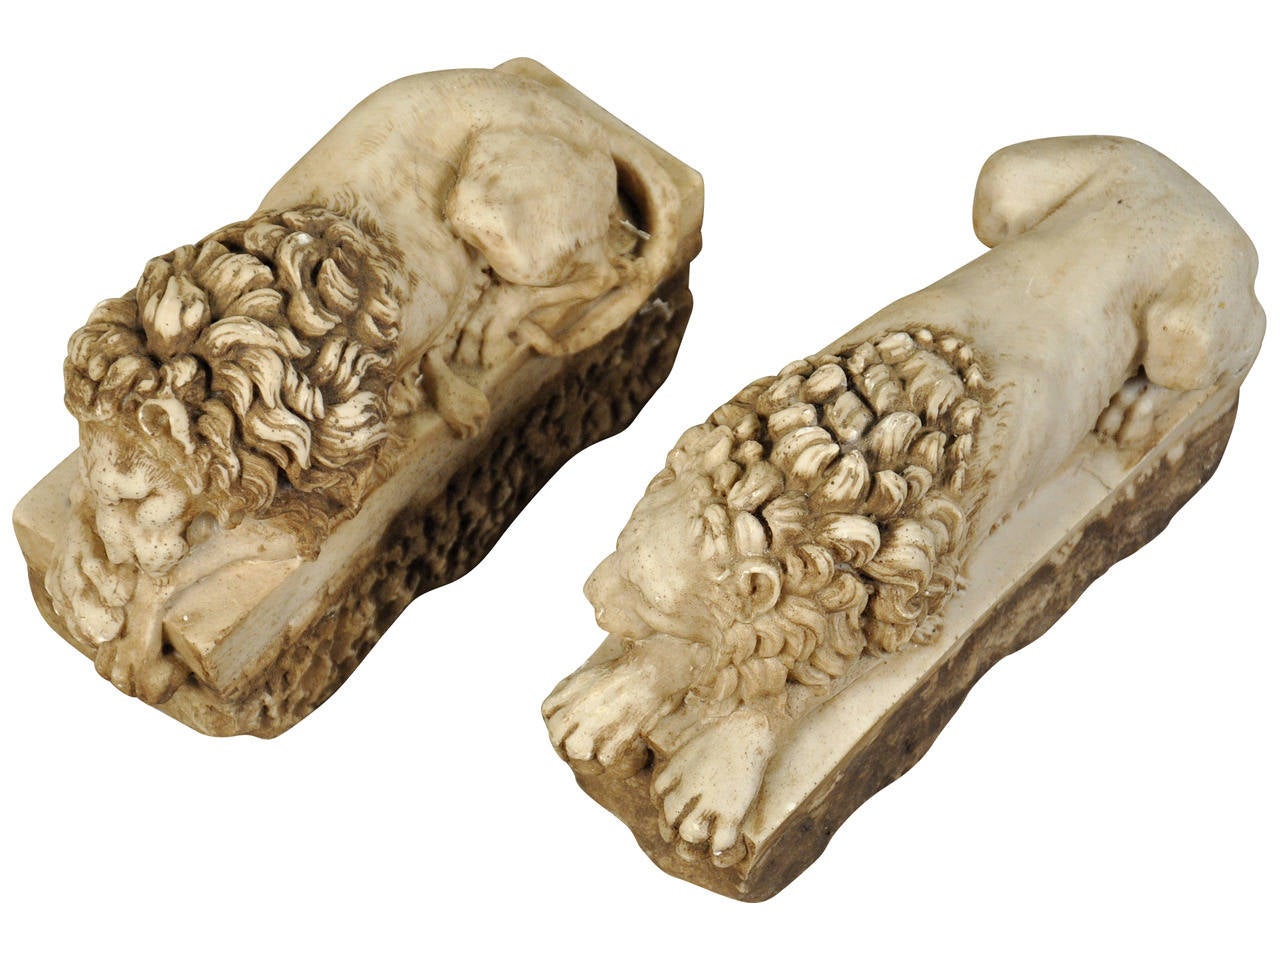 Italian A Pair Of Hand Carved Marble Recumbant Lions From Italy On Rectangular Plinths